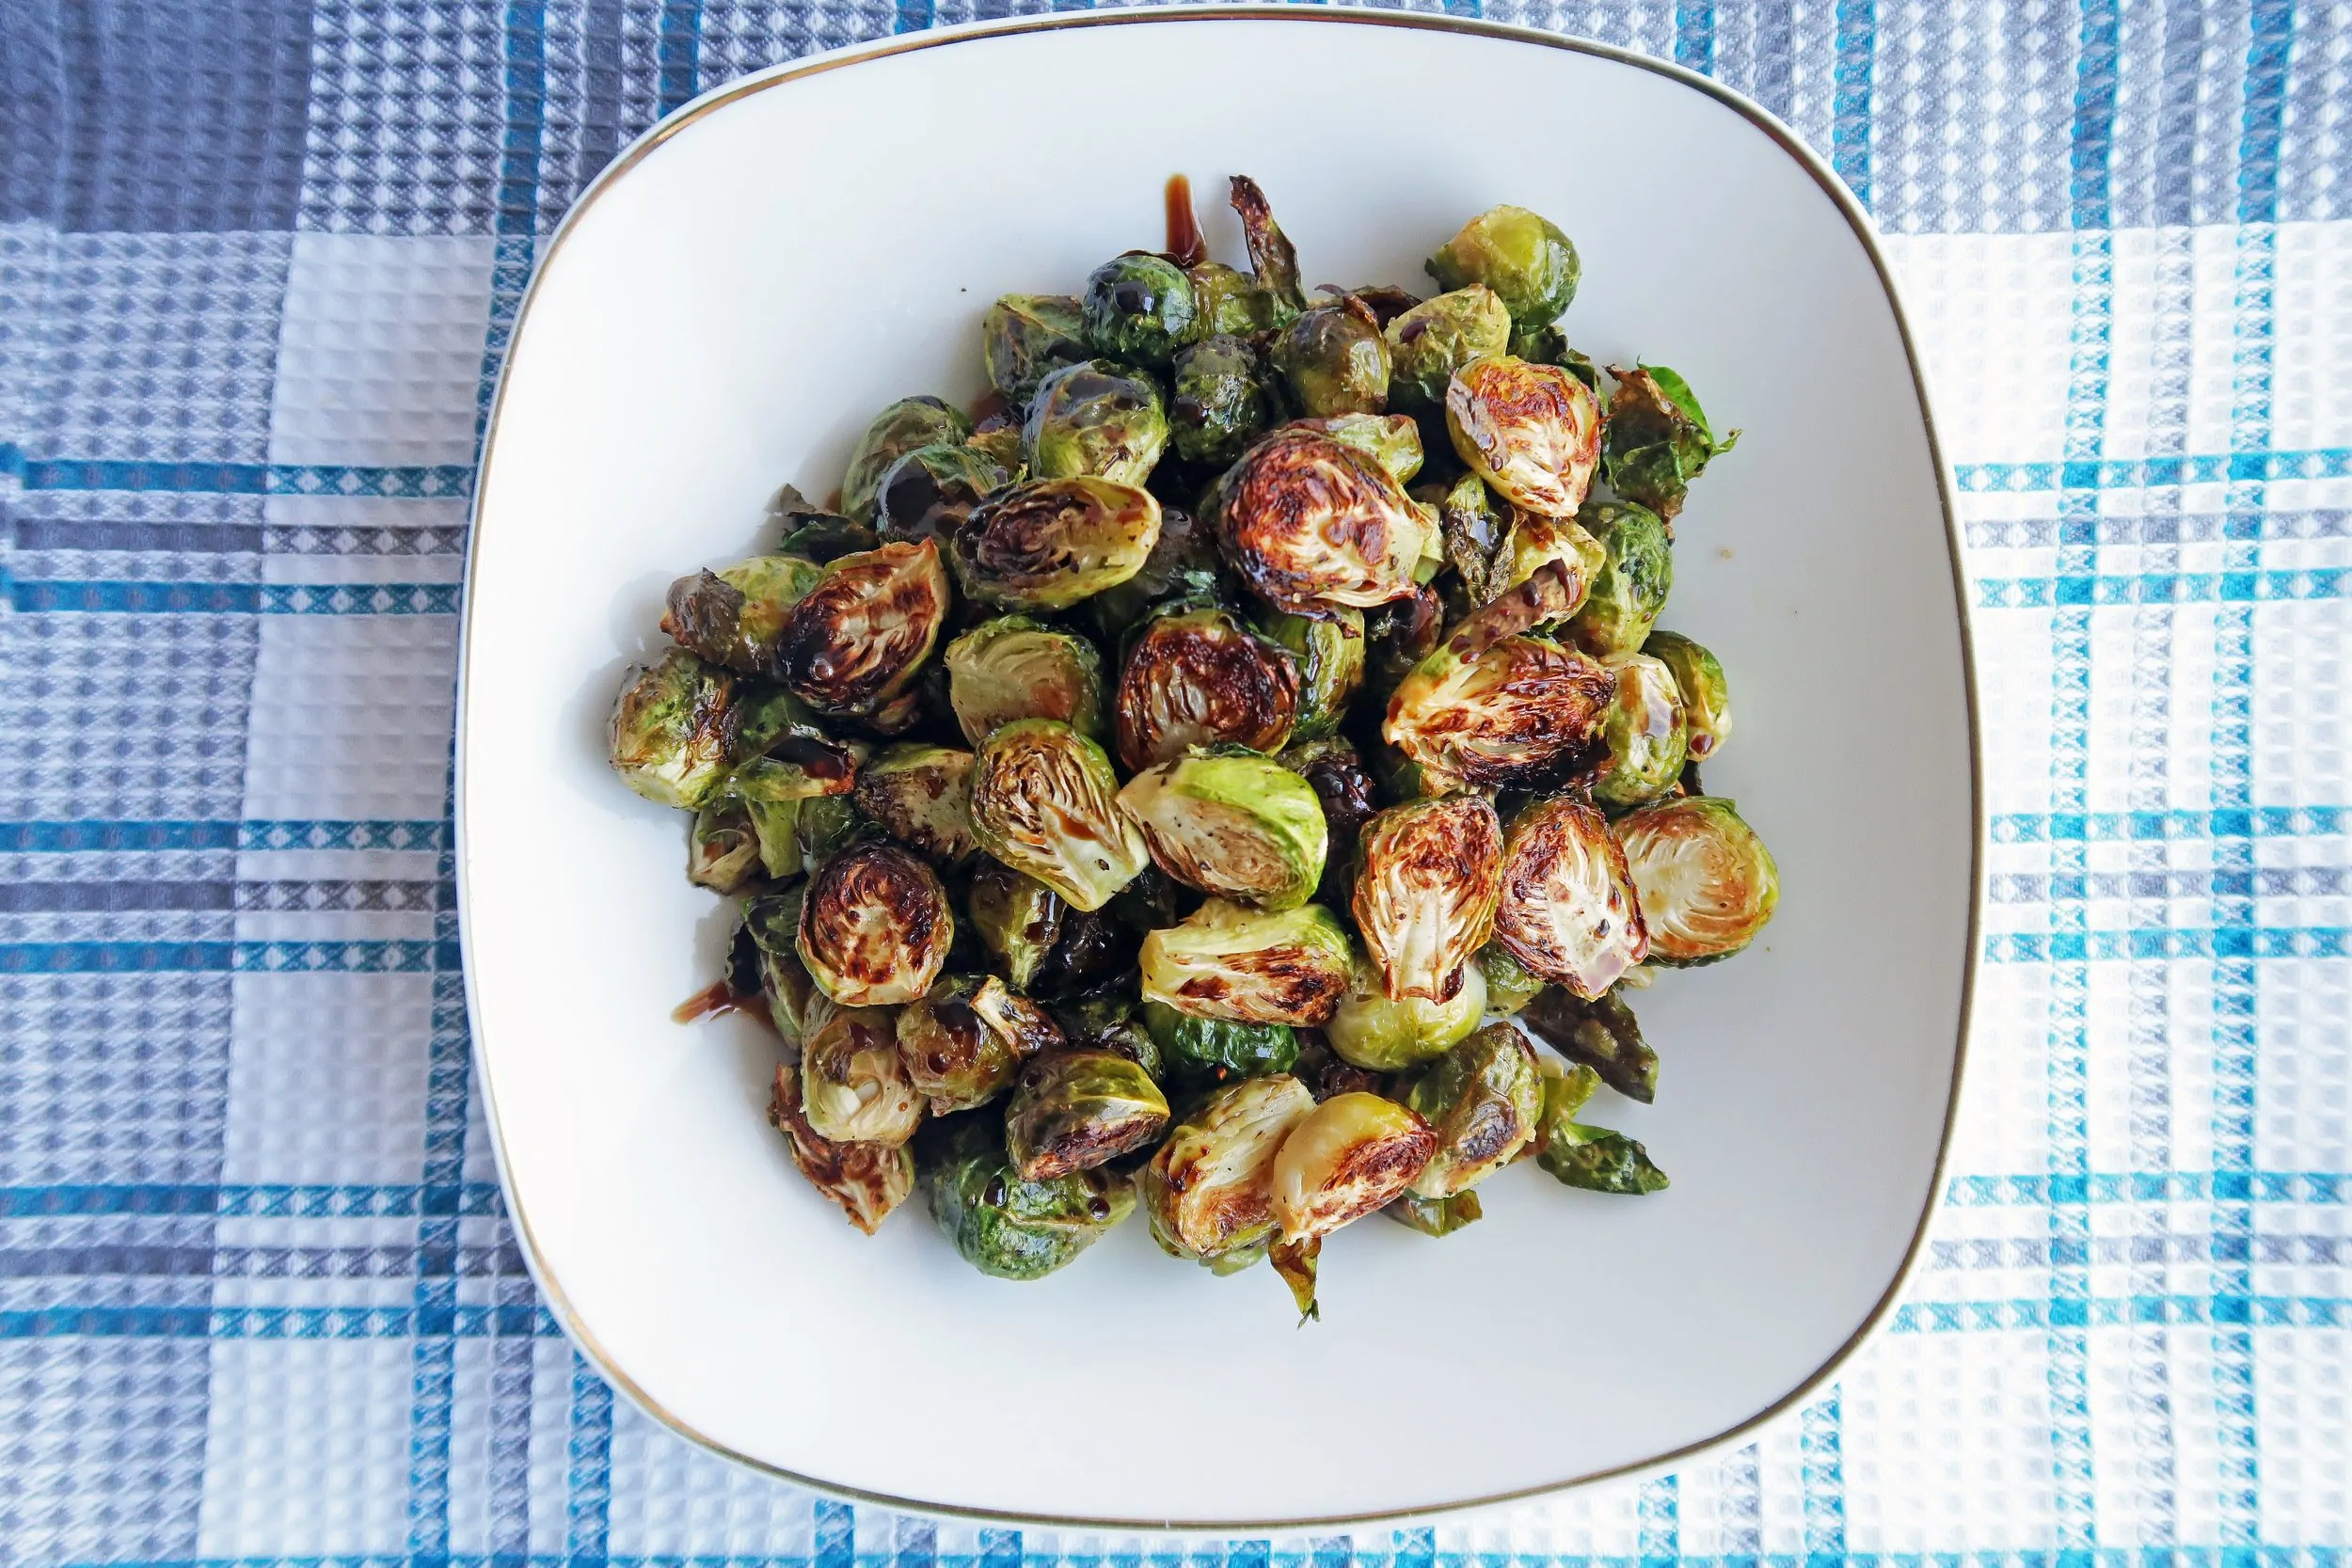 Gluten-free and vegan Roasted Brussels Sprouts with Balsamic-Maple Glaze piled on a white plate.